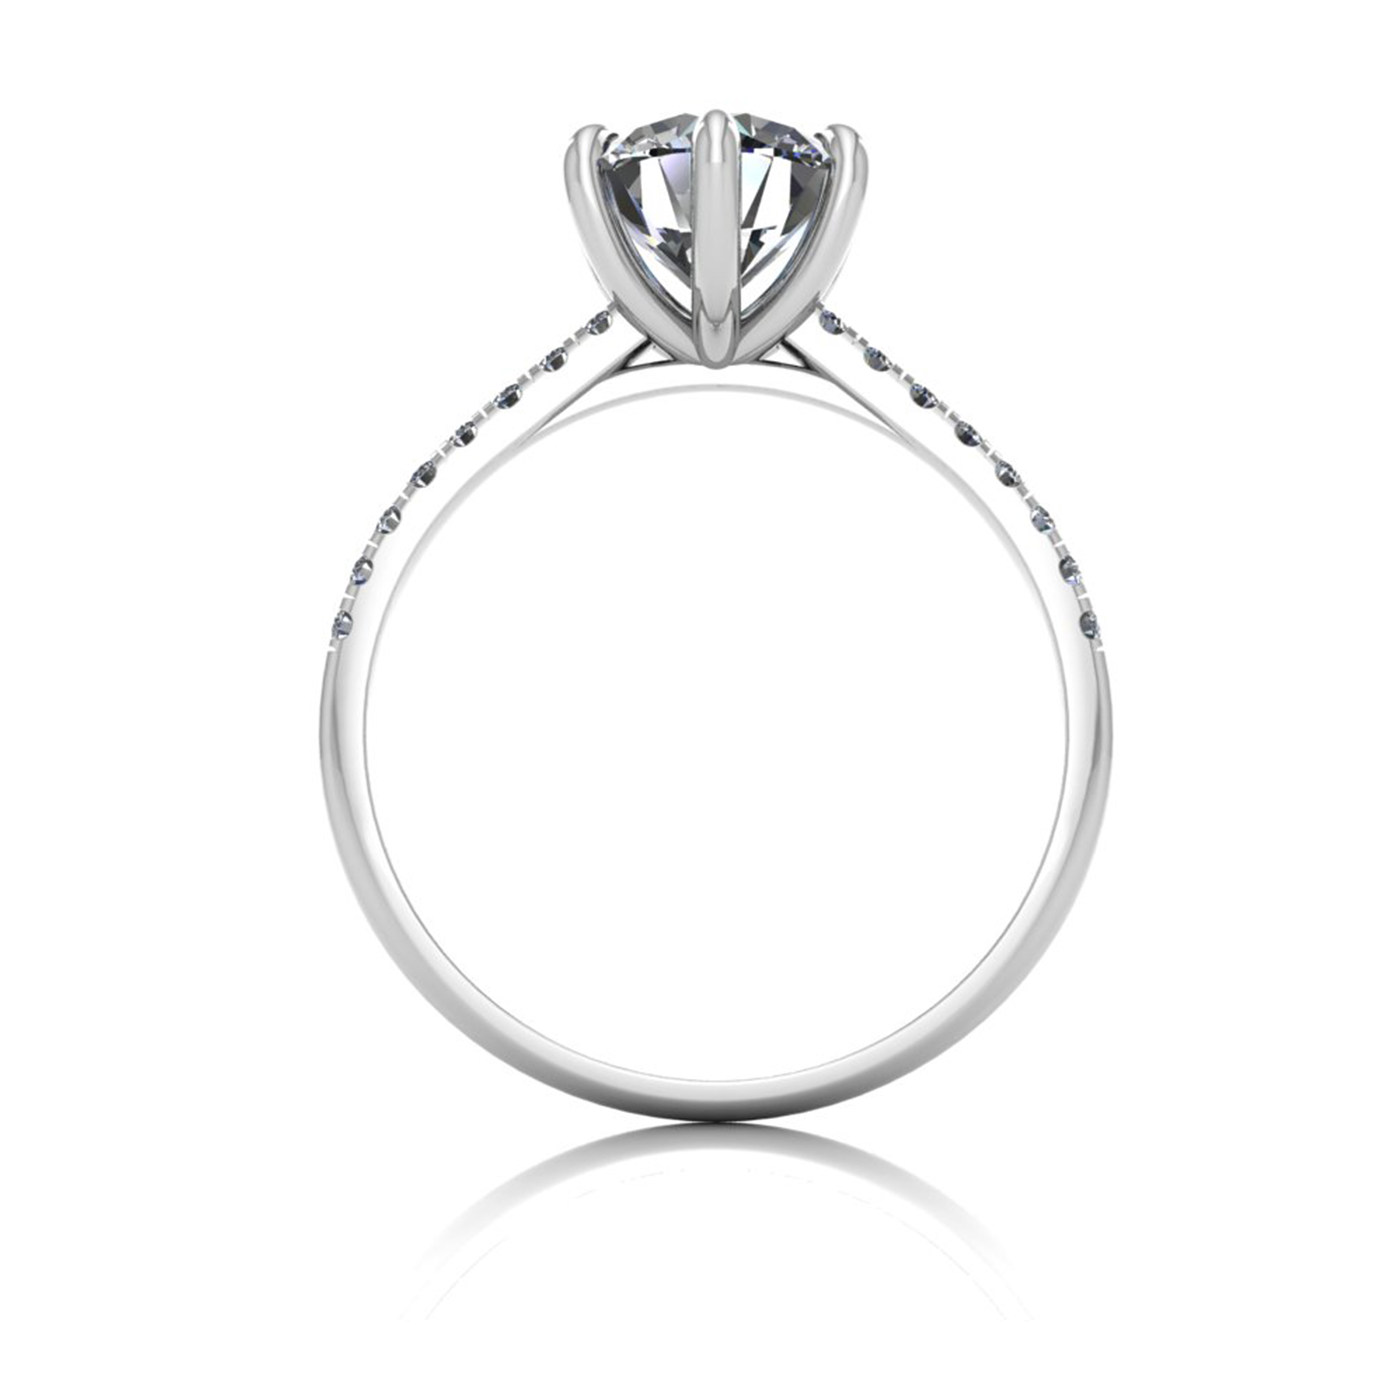 18k white gold 1,50 ct 6 prongs round cut diamond engagement ring with whisper thin pavÉ set band